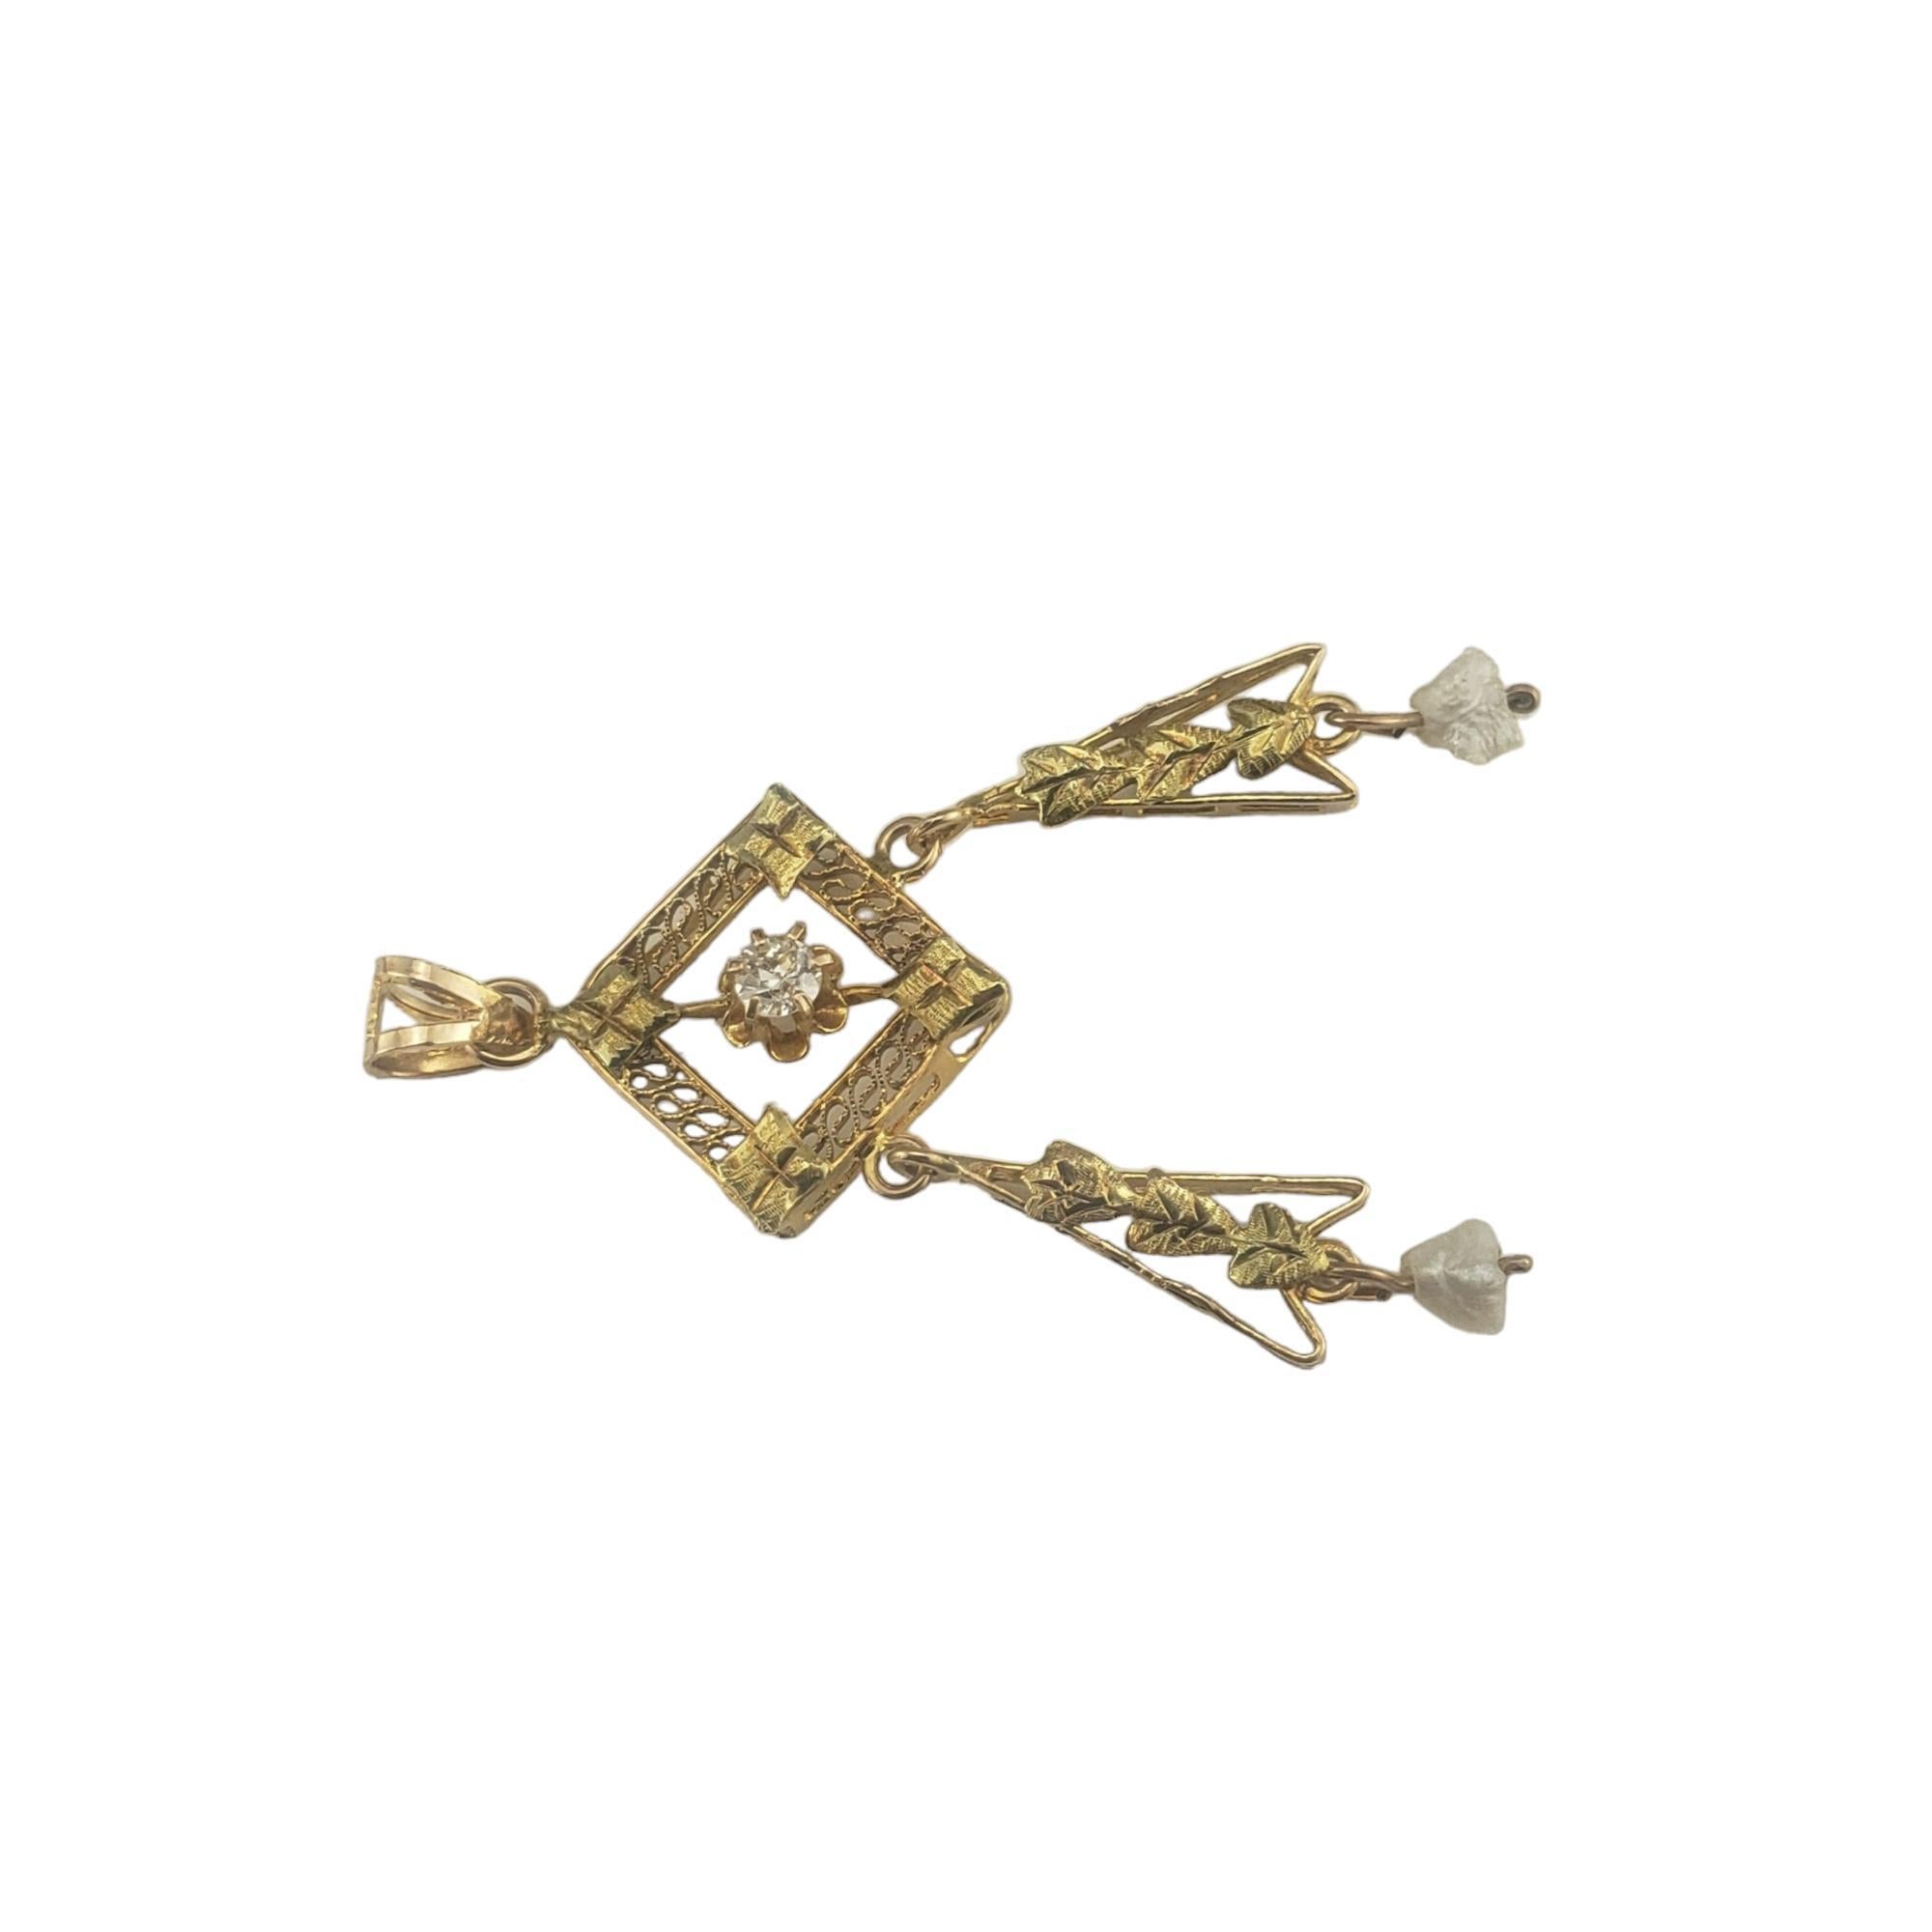 Vintage 14 Karat Yellow Gold and Diamond Pendant-

This elegant pendant features one European cut diamond and two freshwater pearls set in beautifully detailed 14K yellow gold.

Approximate total diamond weight: .07 ct.

Diamond color: G

Diamond